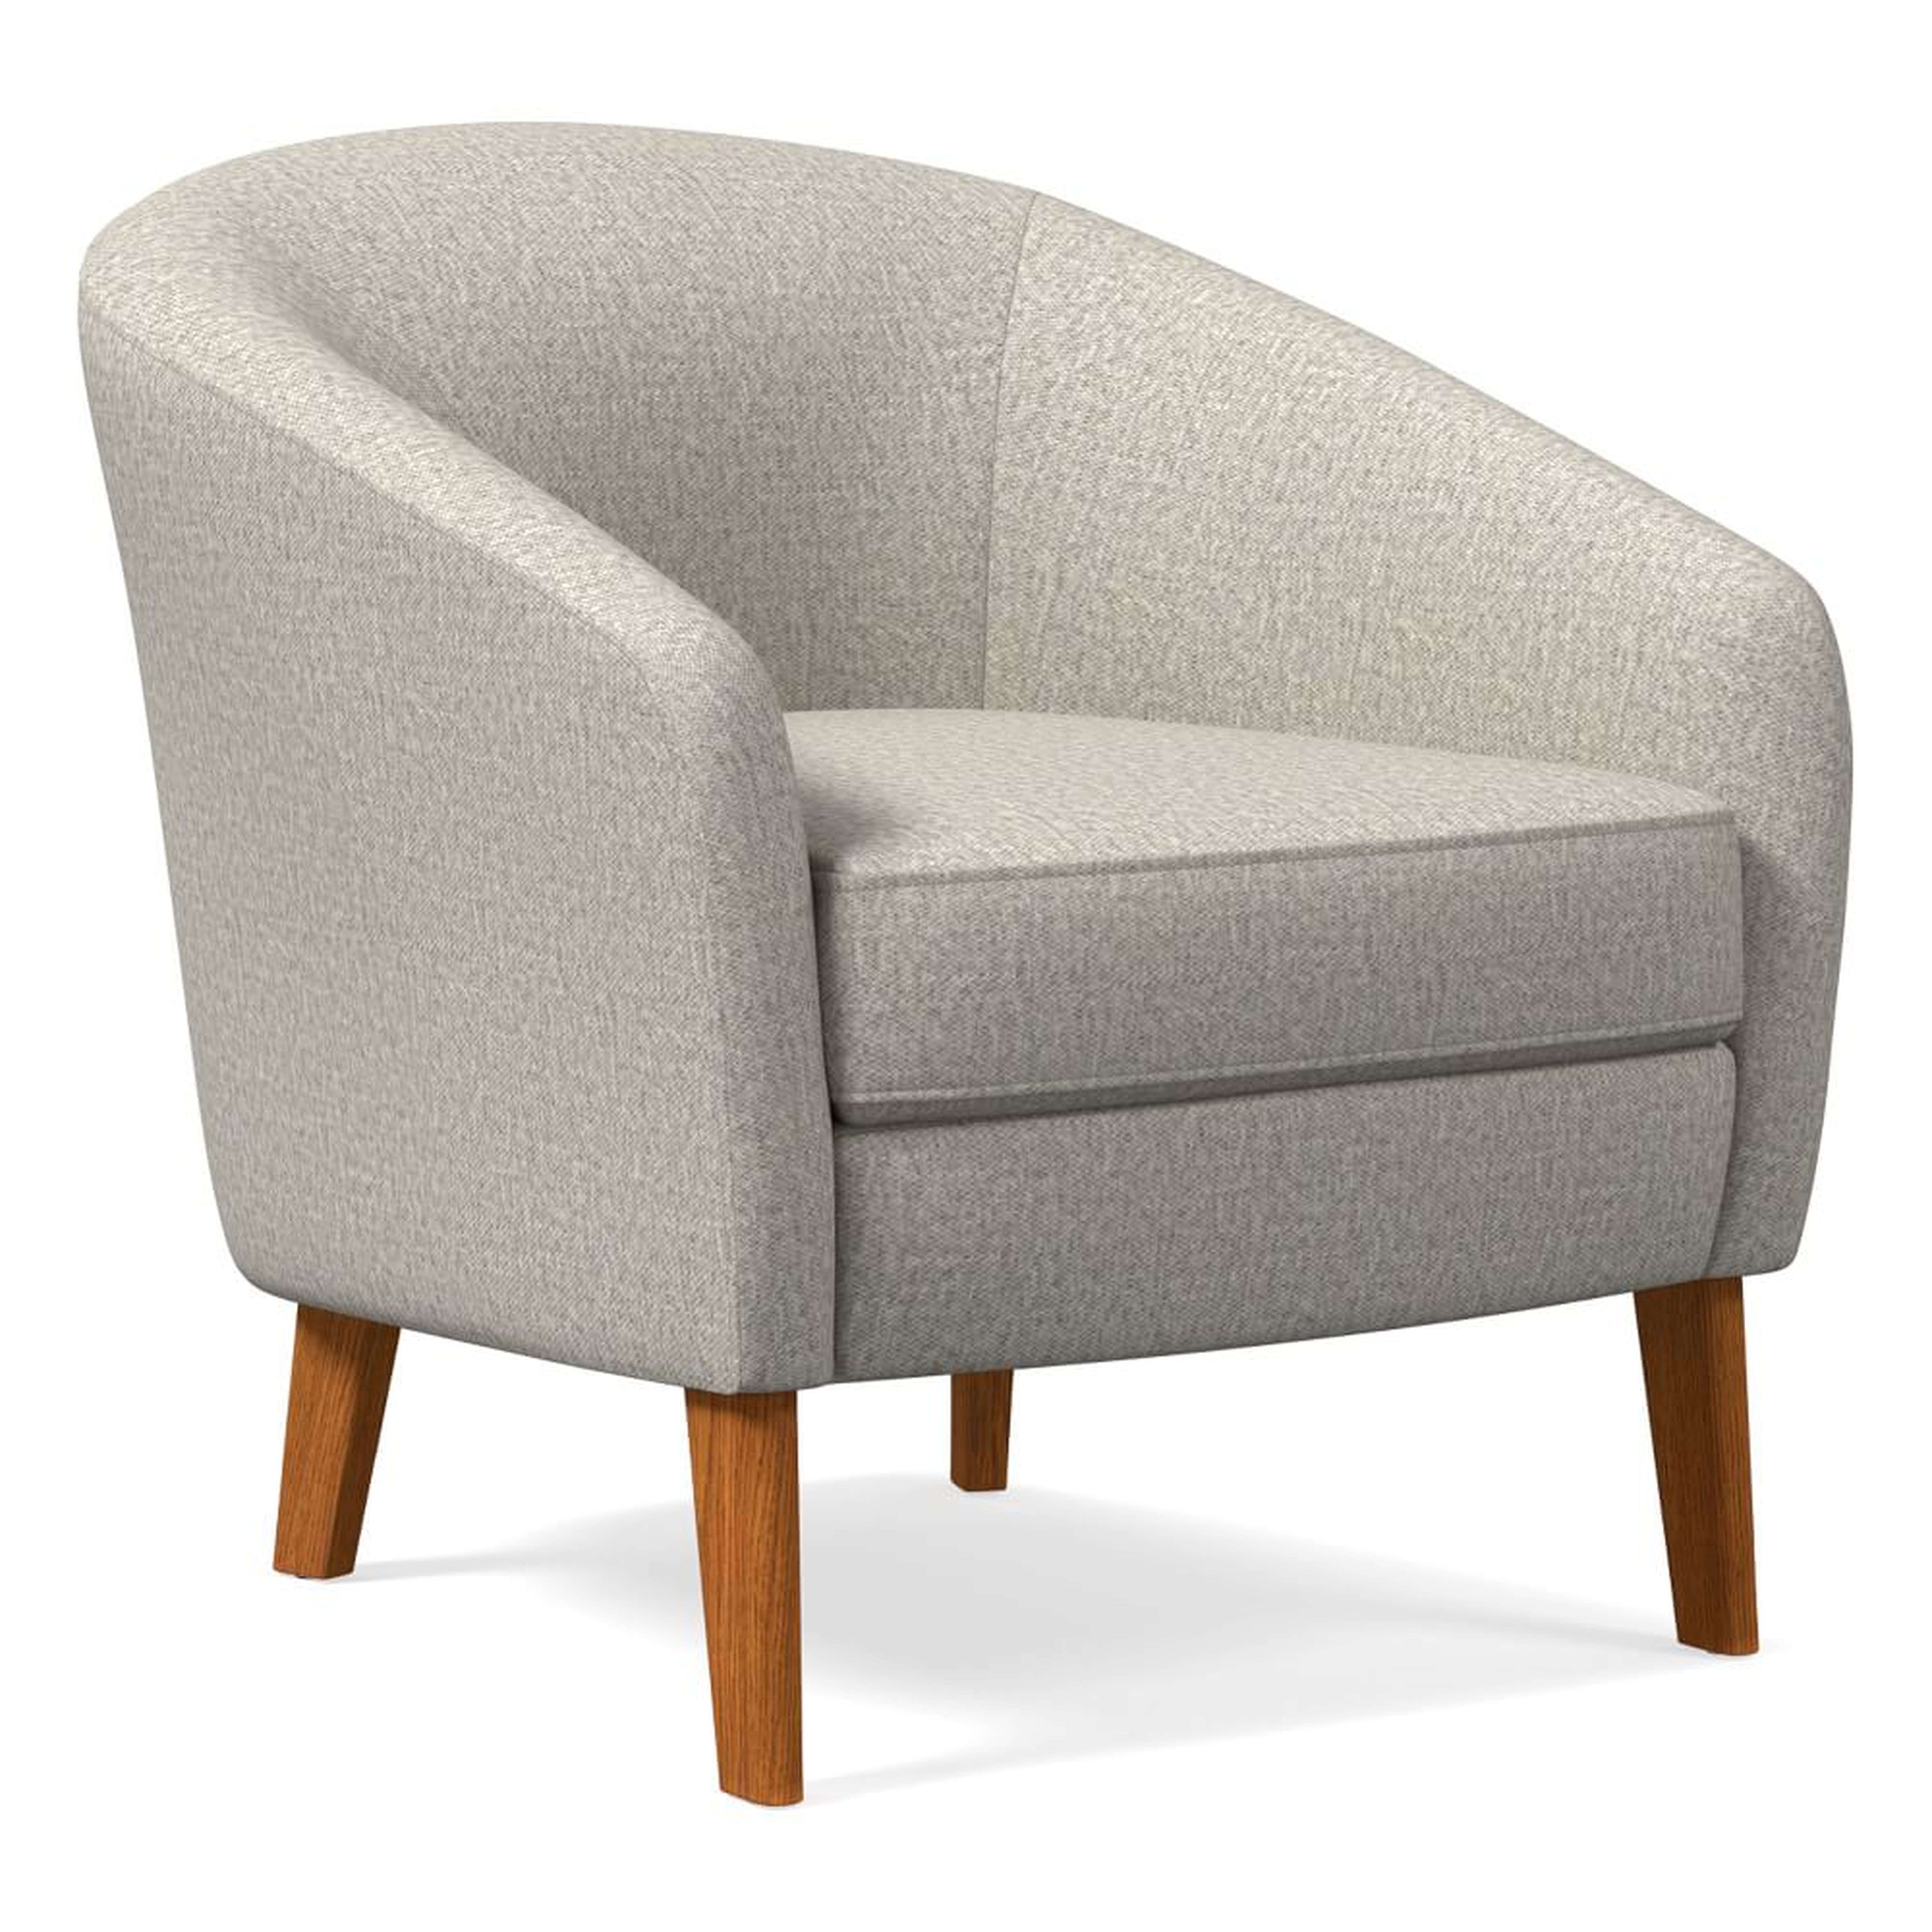 Jonah Chair, Poly, Twill, Dove, Pecan - West Elm